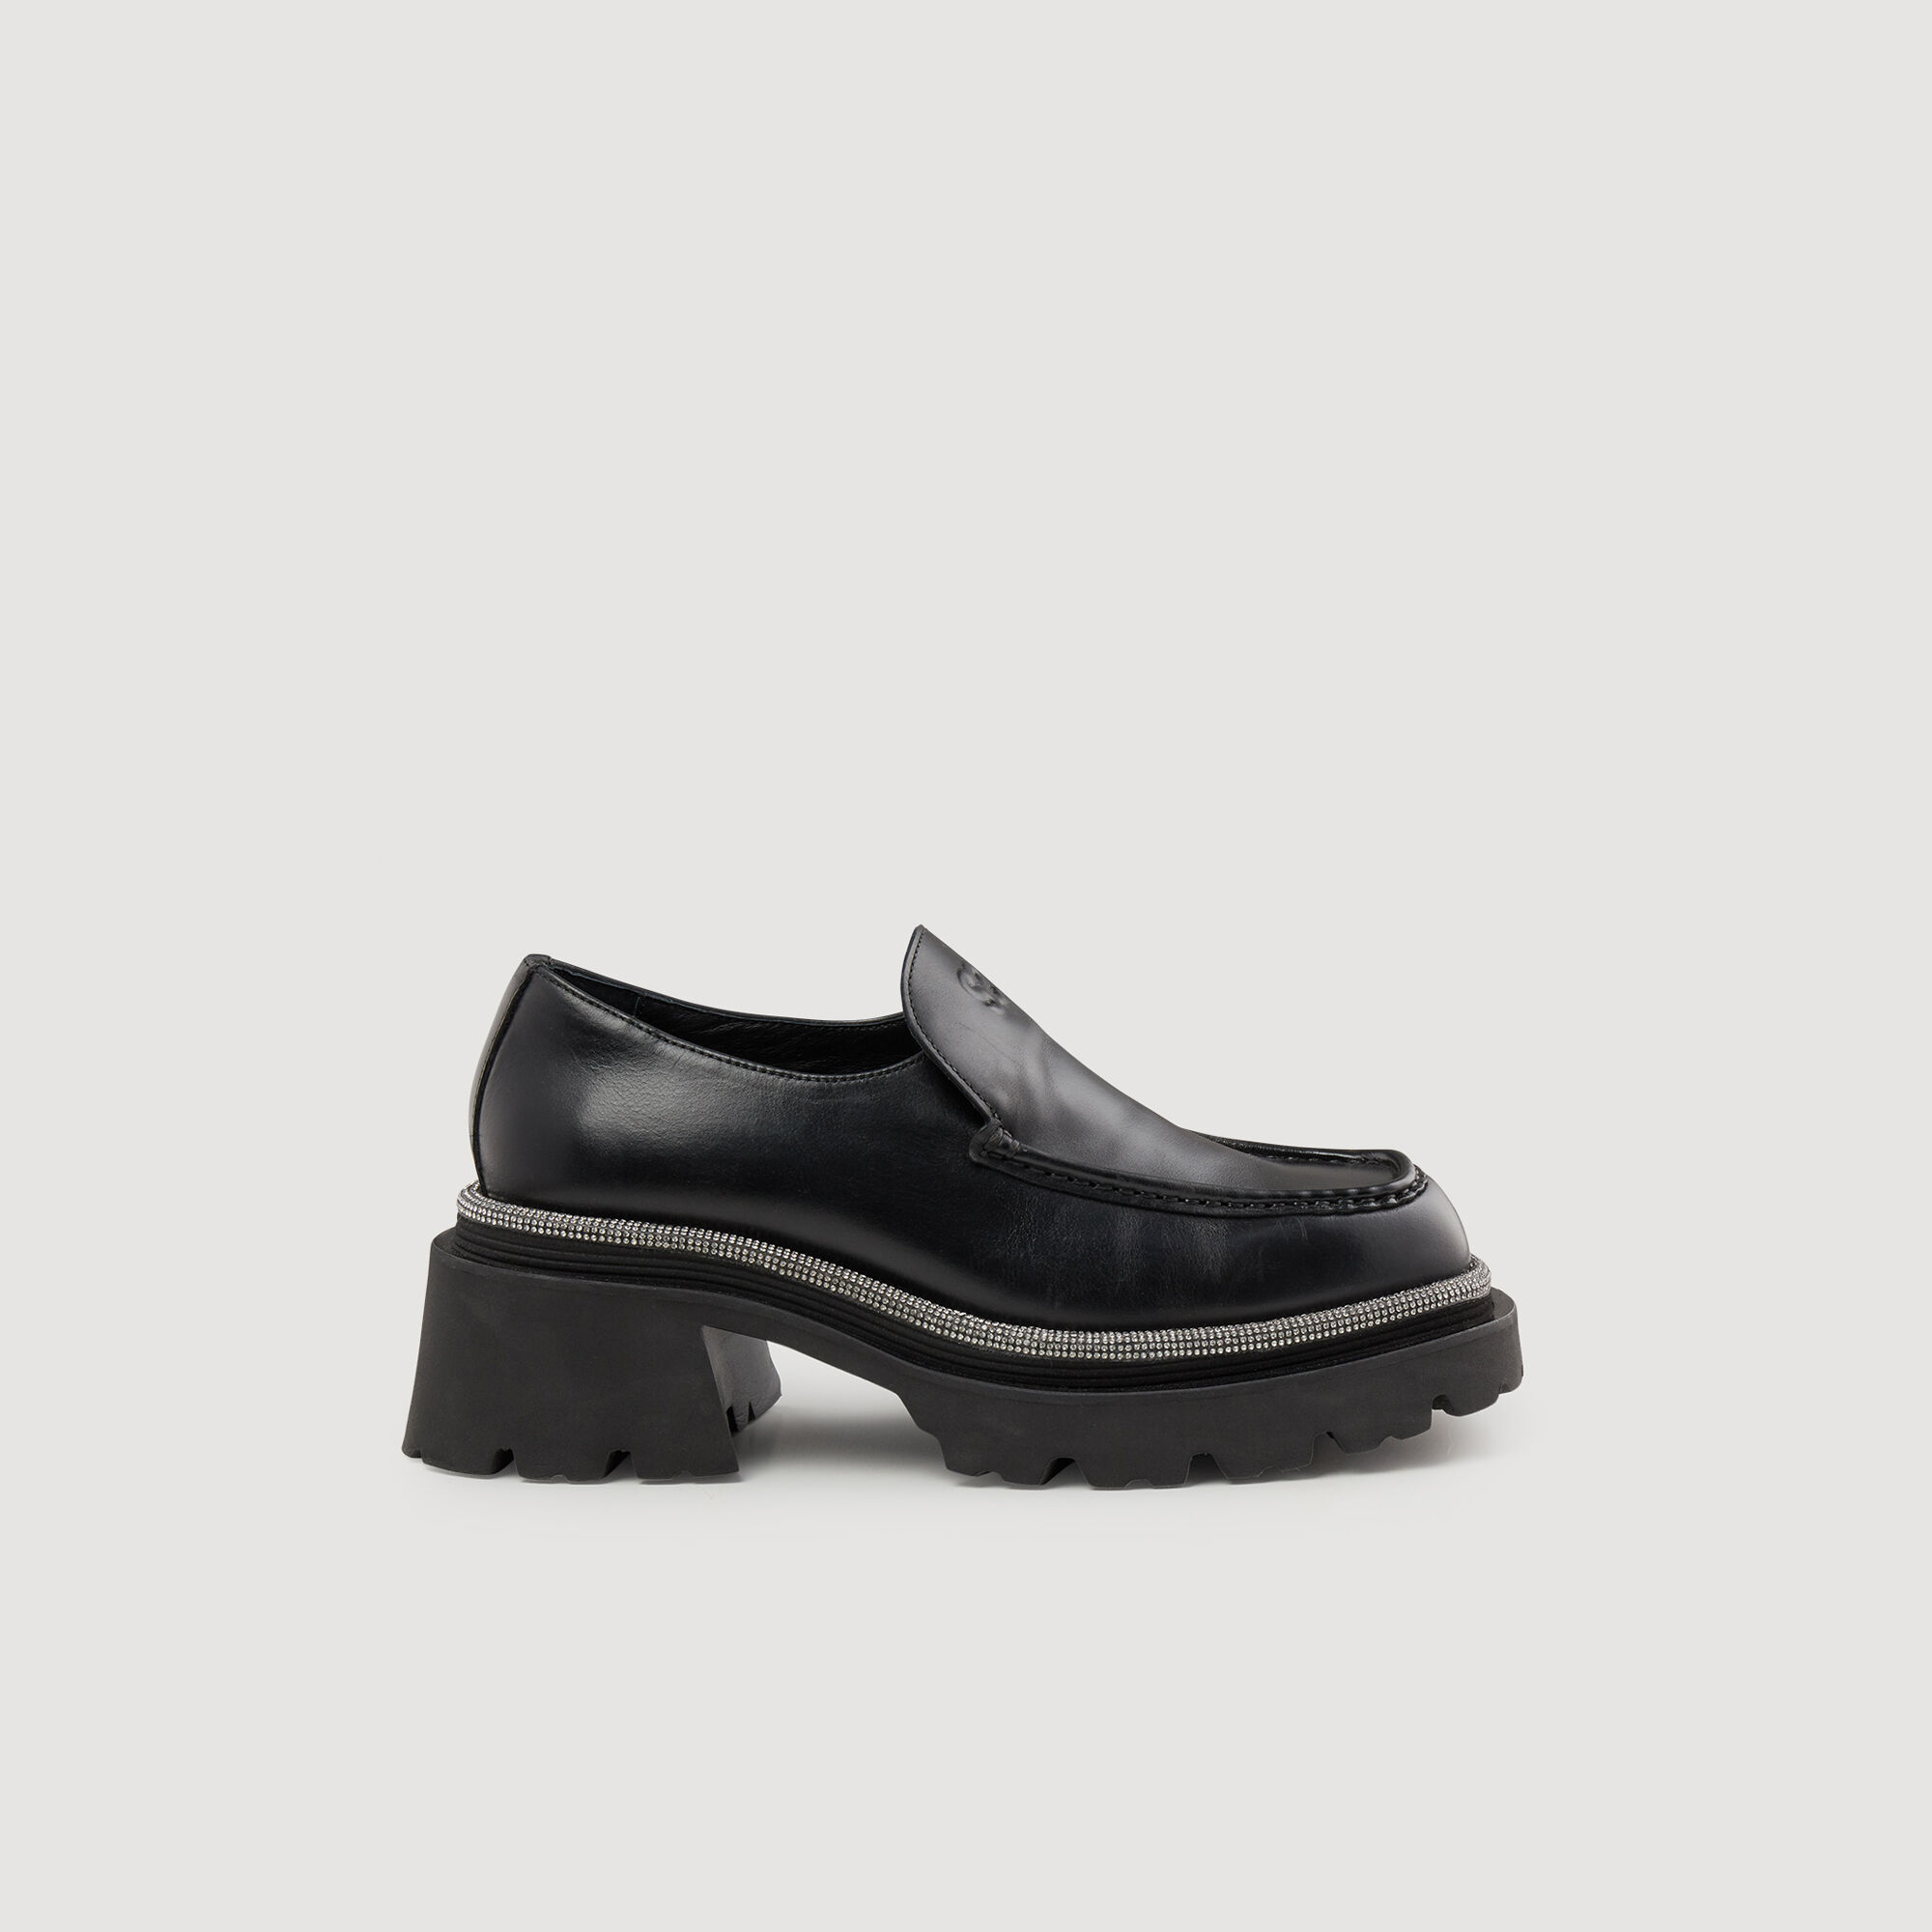 Loafers with thick notched soles